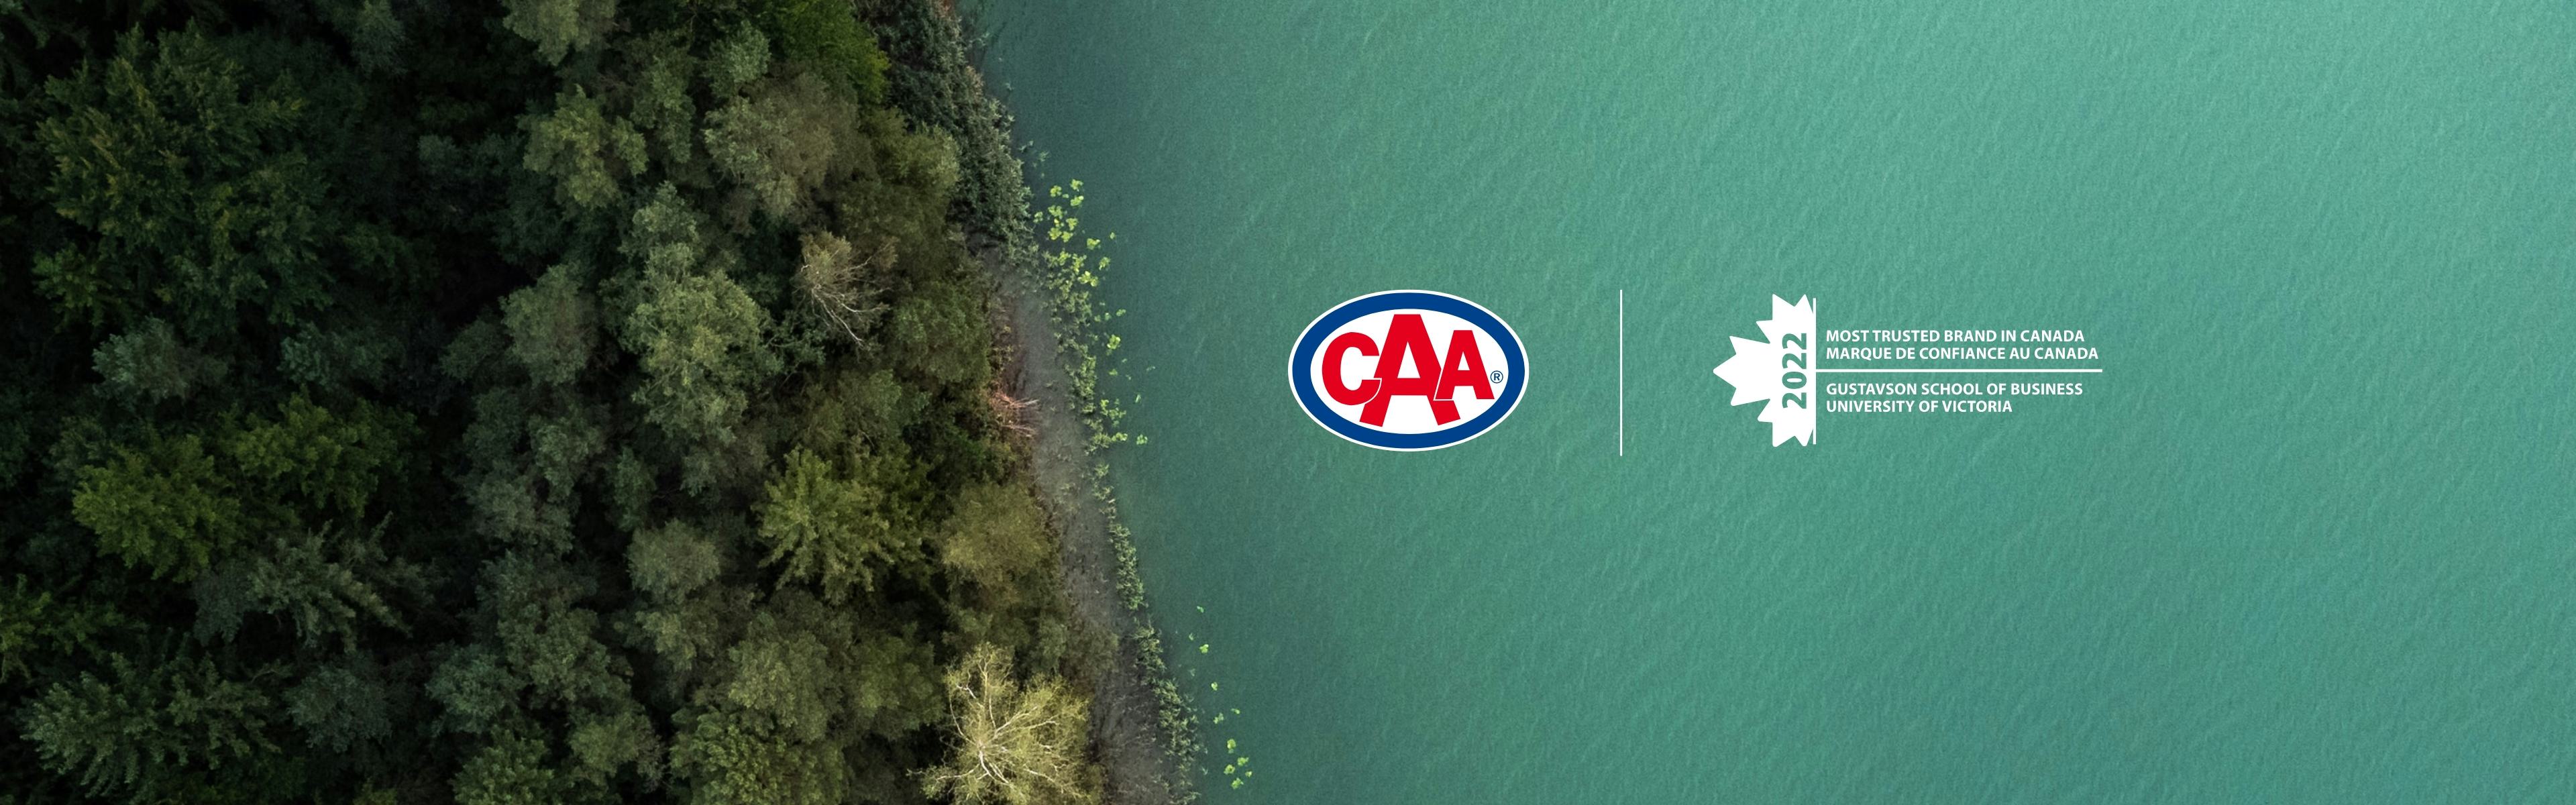 CAA named Canada’s most trusted brand